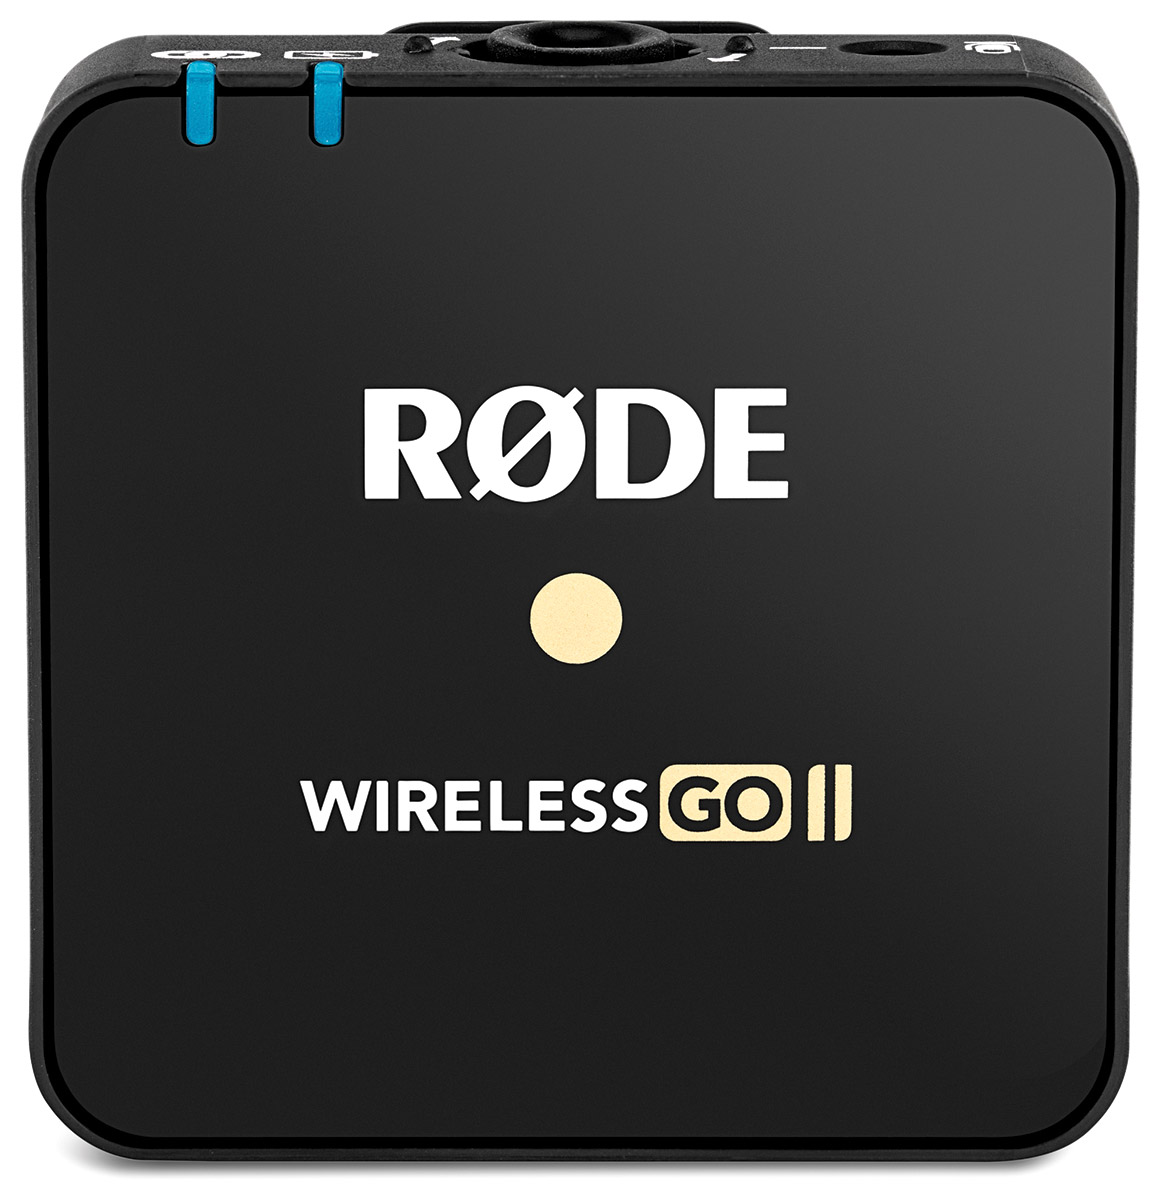 RODE WIRELESS GO II TX Transmitter only, compact, clip-on, 2.4 